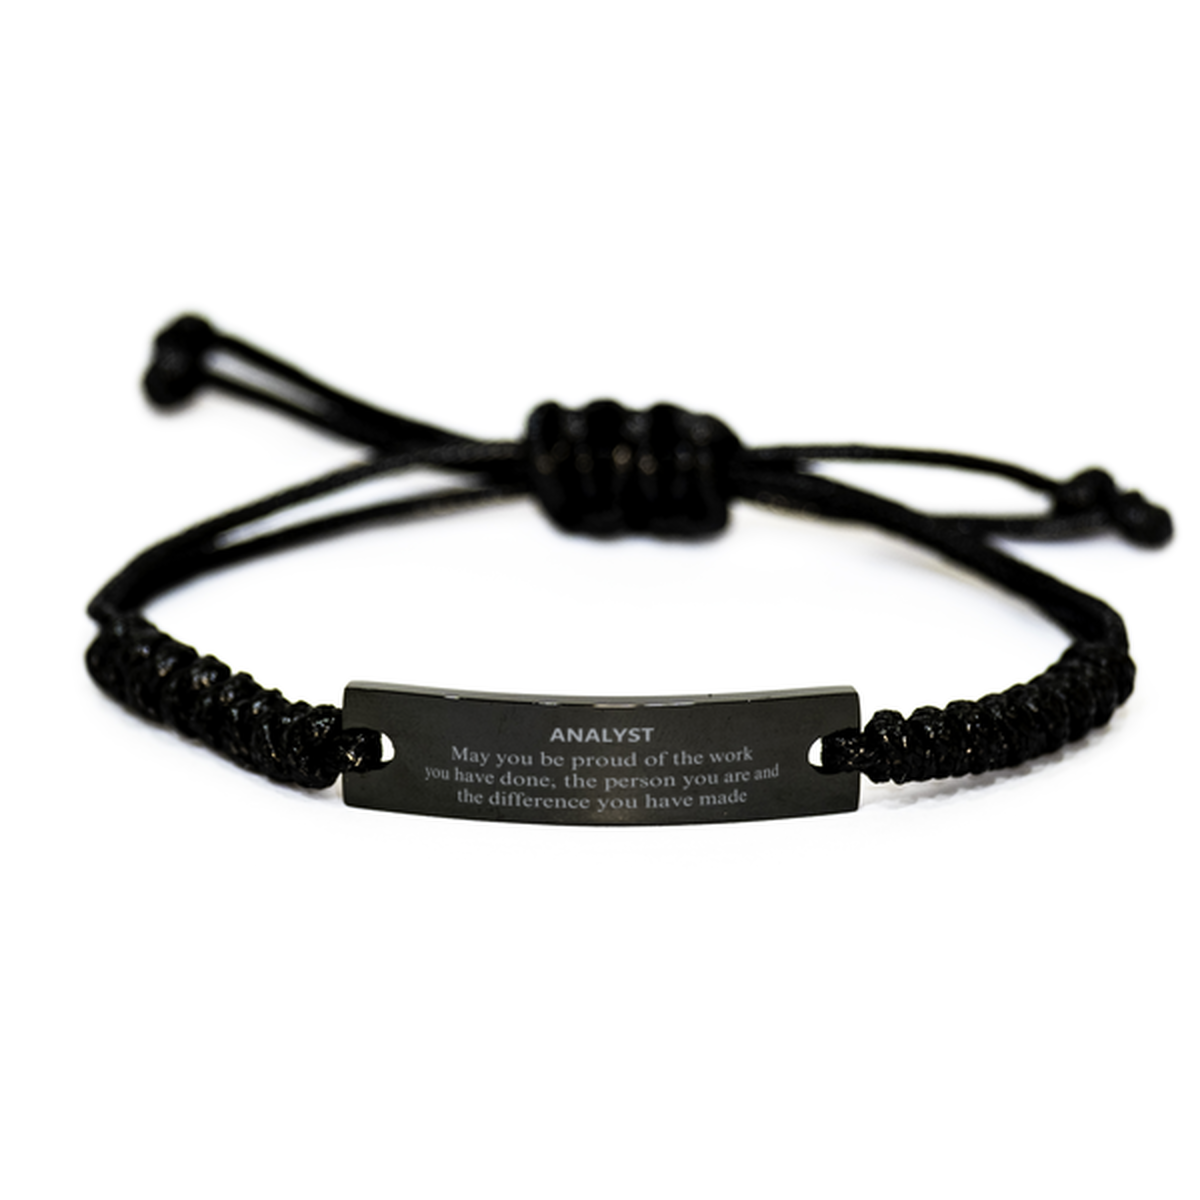 Analyst May you be proud of the work you have done, Retirement Analyst Black Rope Bracelet for Colleague Appreciation Gifts Amazing for Analyst